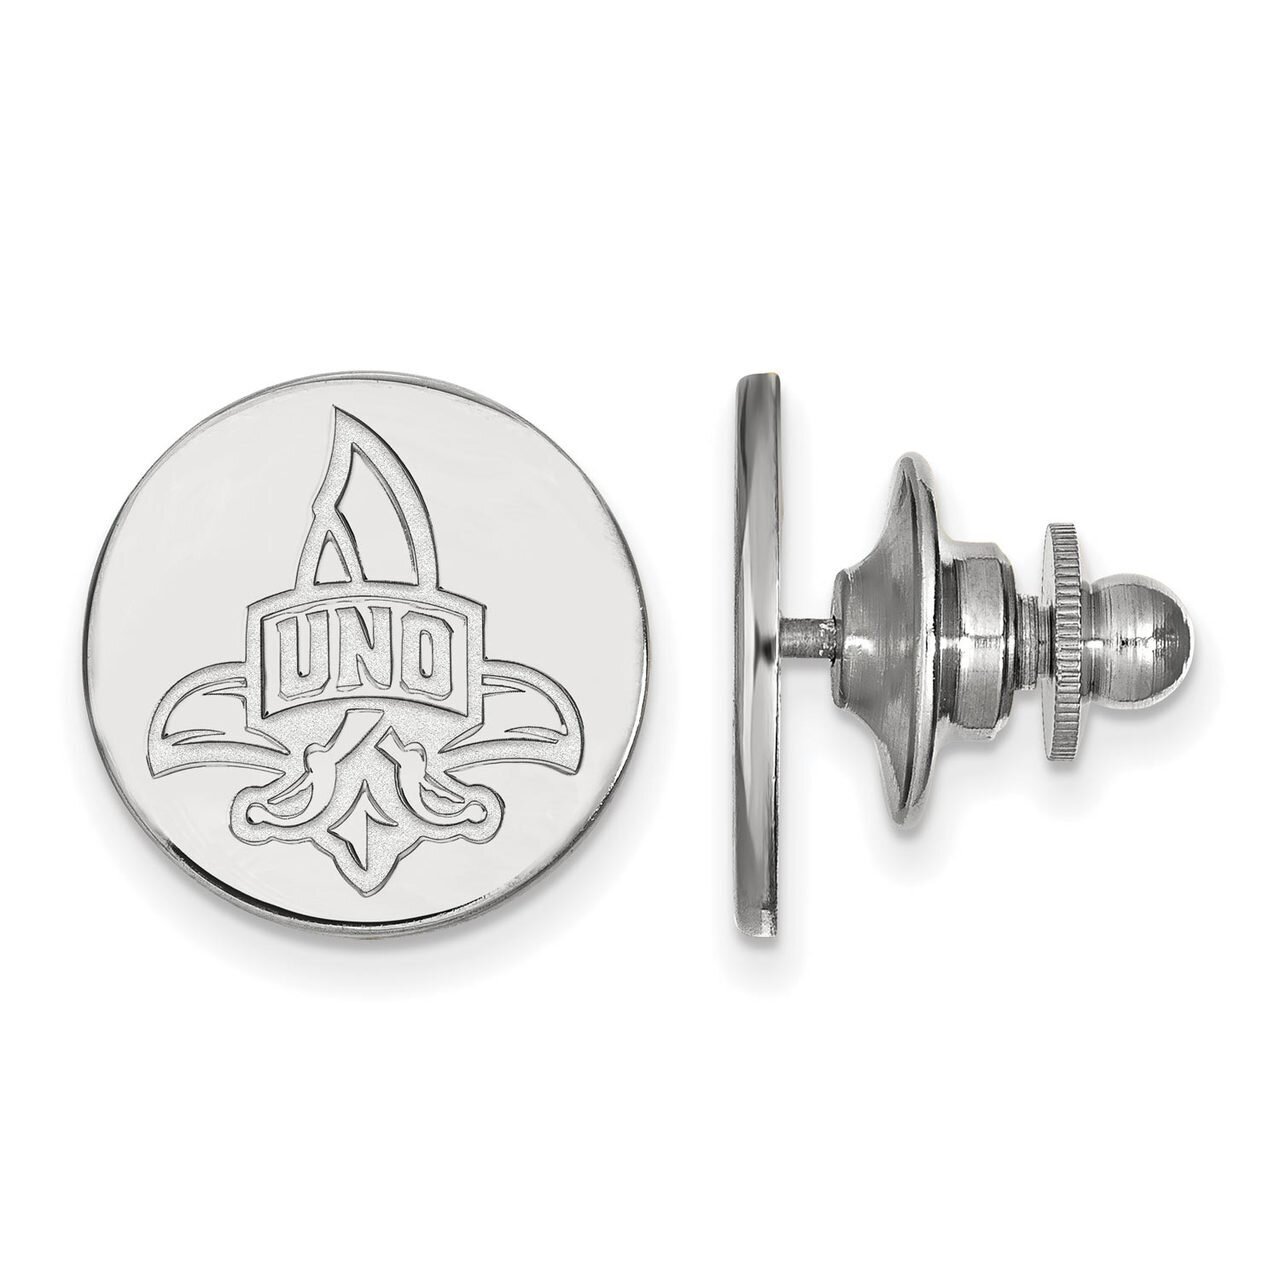 University of New Orleans Lapel Pin Sterling Silver SS007UNO